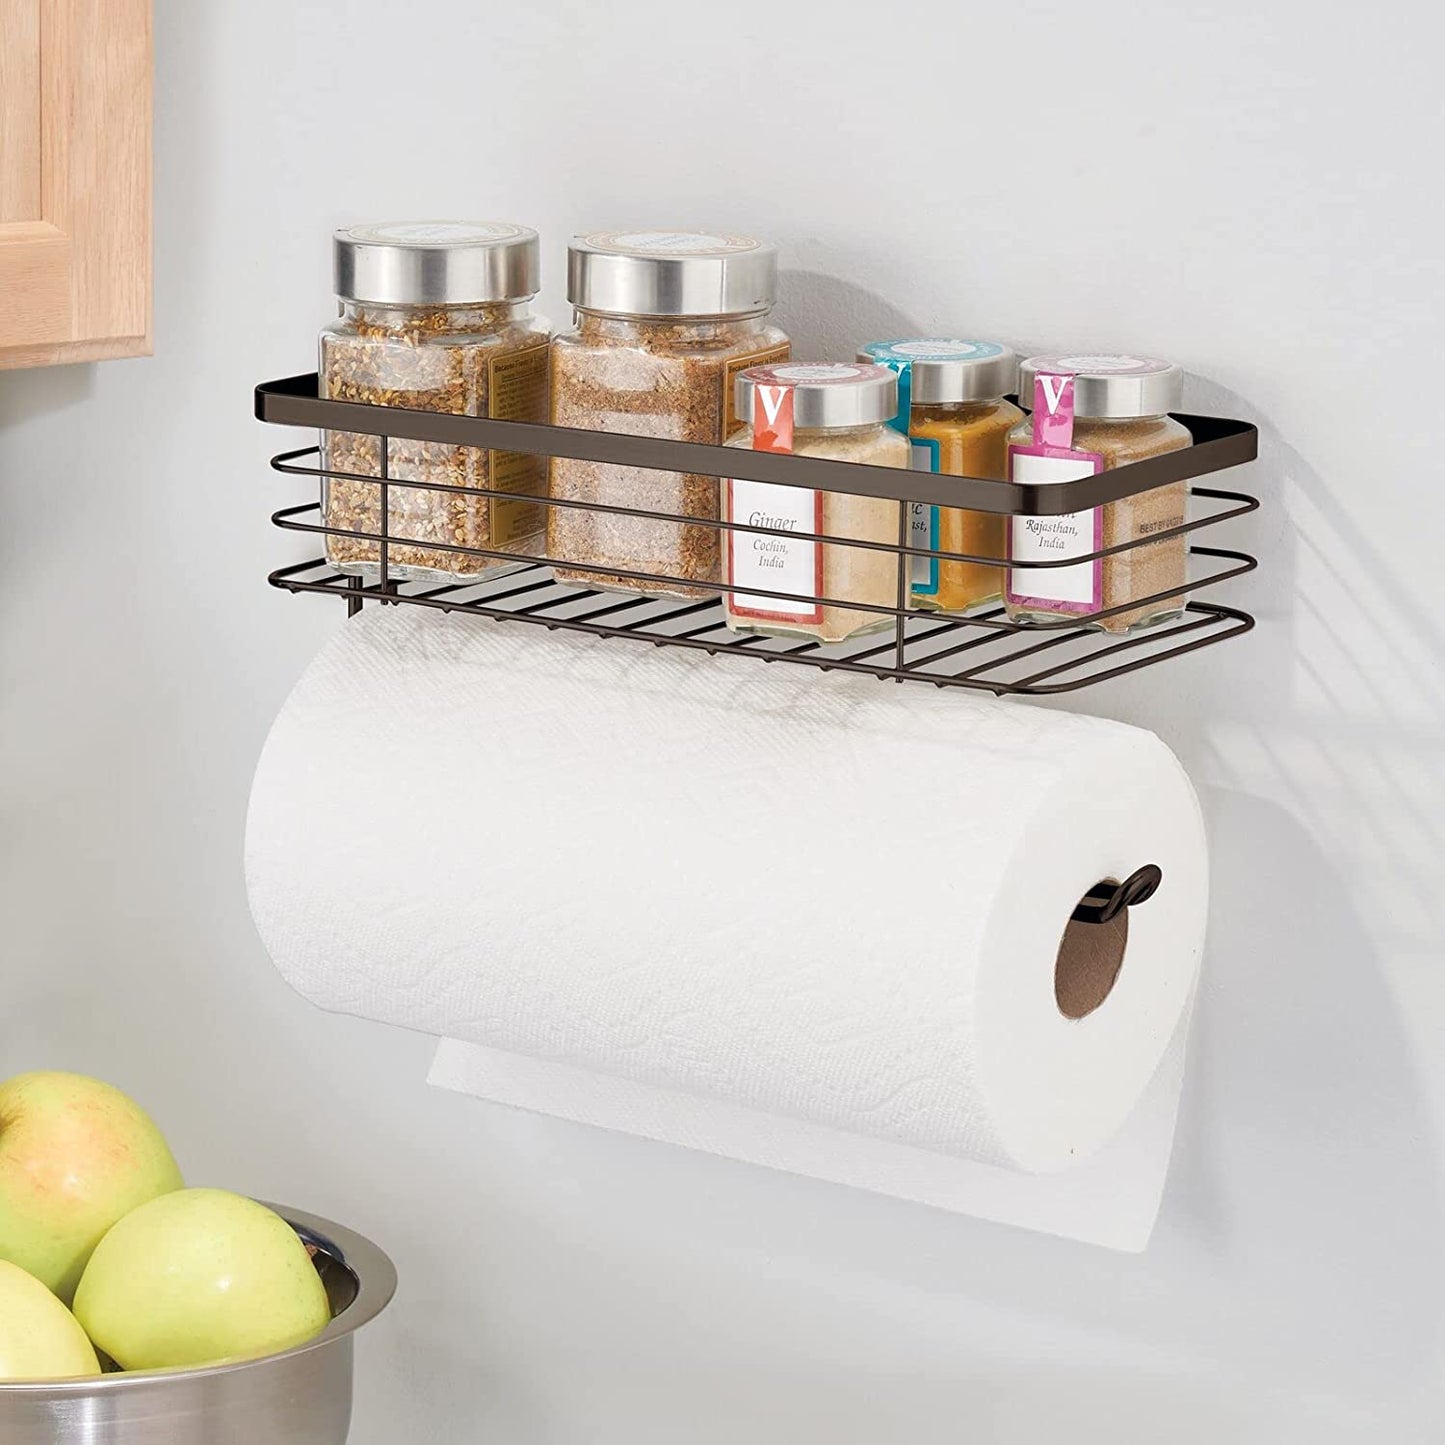 Paper Towel Holder with Spice Rack and Multi-Purpose Shelf - Wall Mount Storage Organizer for Kitchen, Pantry, Laundry, Garage - Durable Metal Wire Design - Bronze